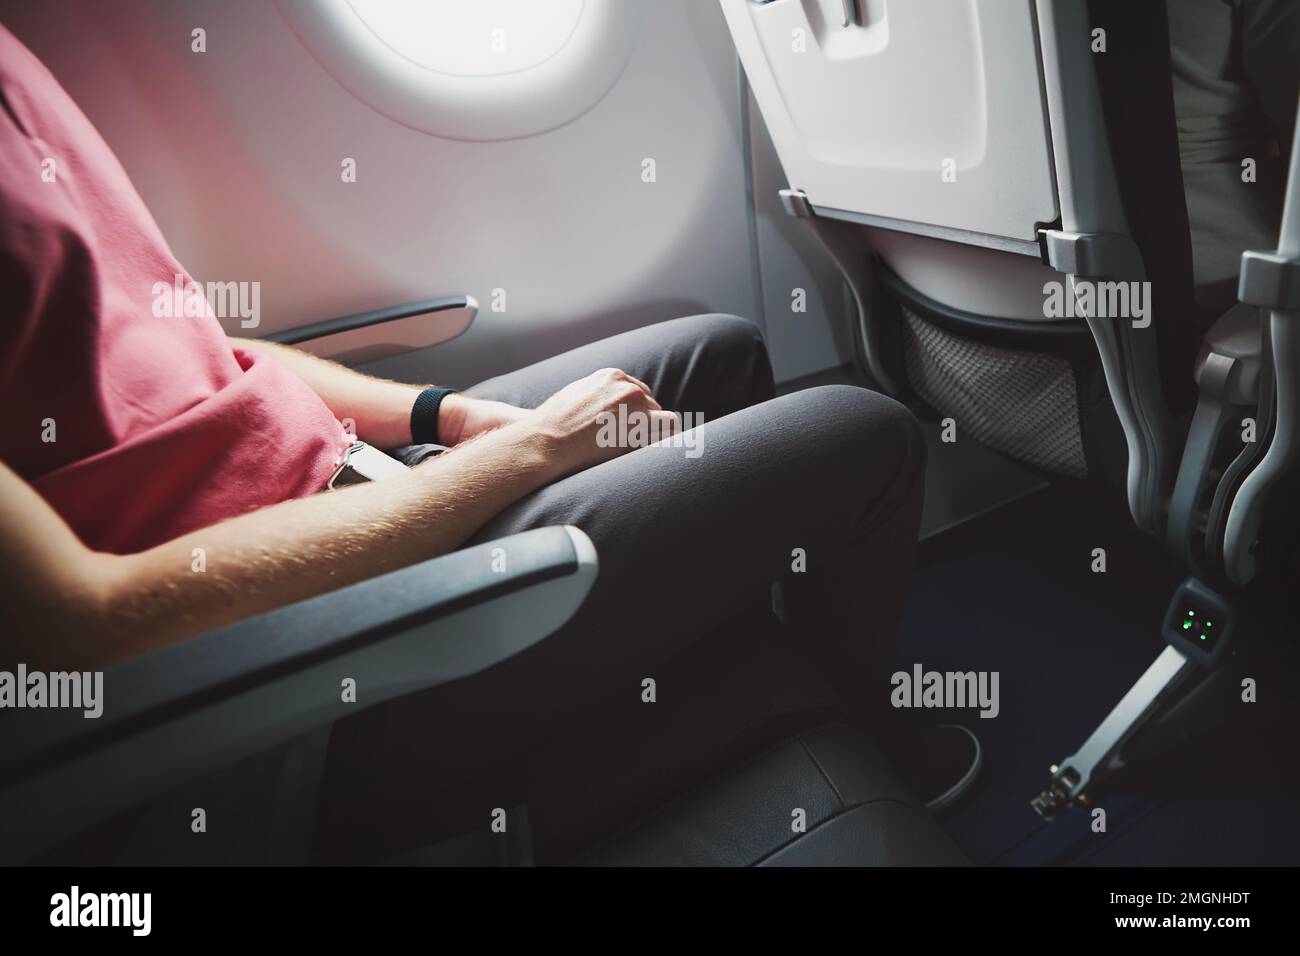 Man resting during flight. Legroom between seats in commercial airplane. Stock Photo